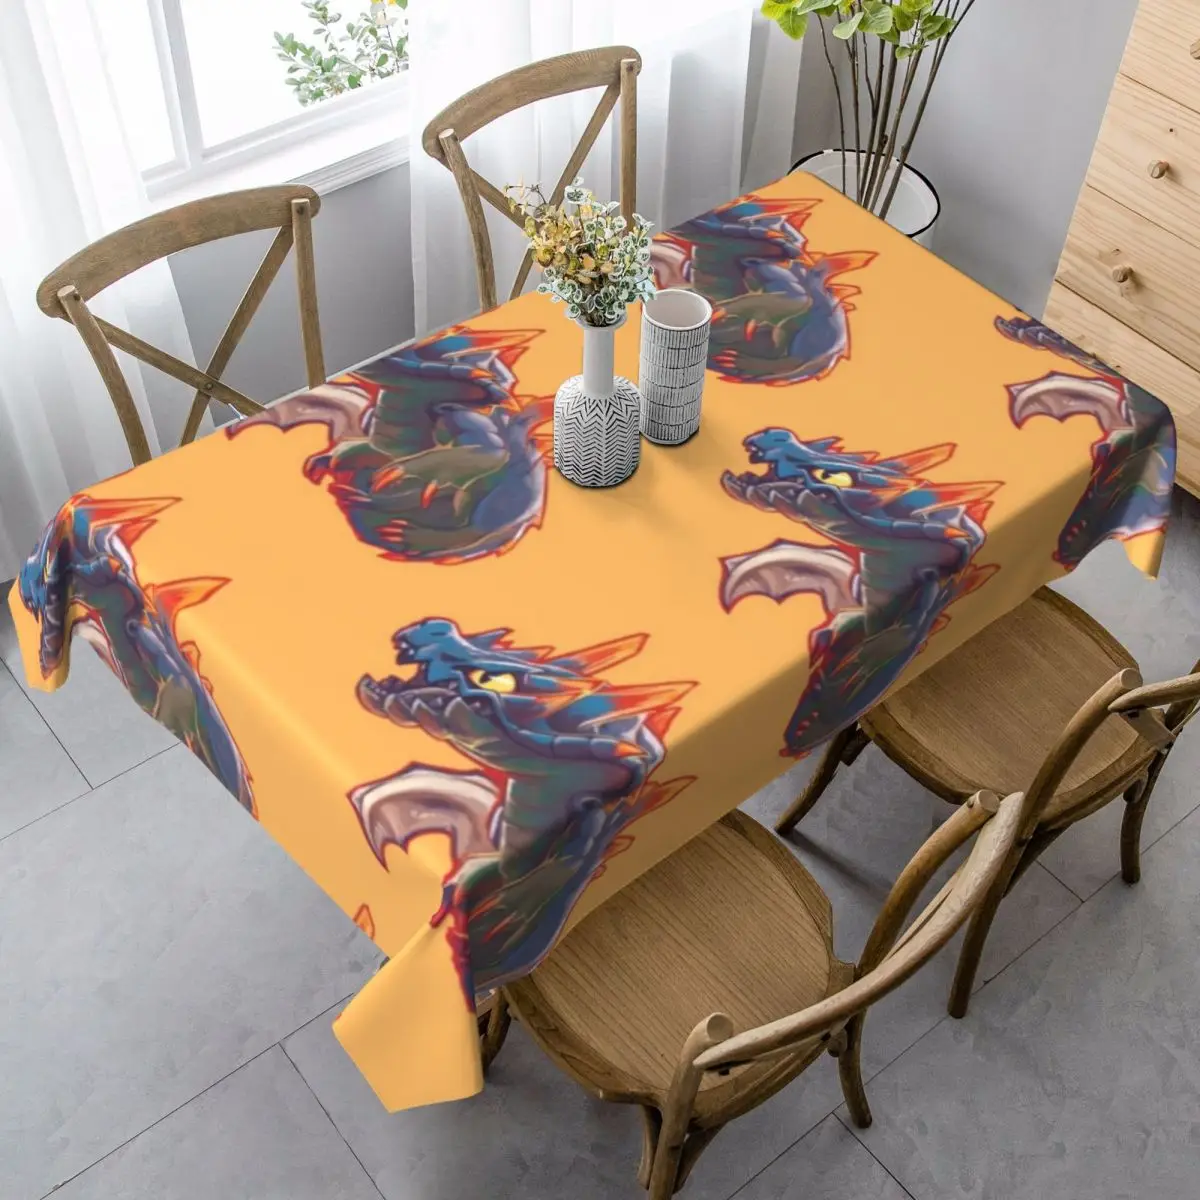 

Monster Hunter Tablecloth Birthday Party Polyester Table Cover Vintage Wholesale Protector Printed Table Cloth